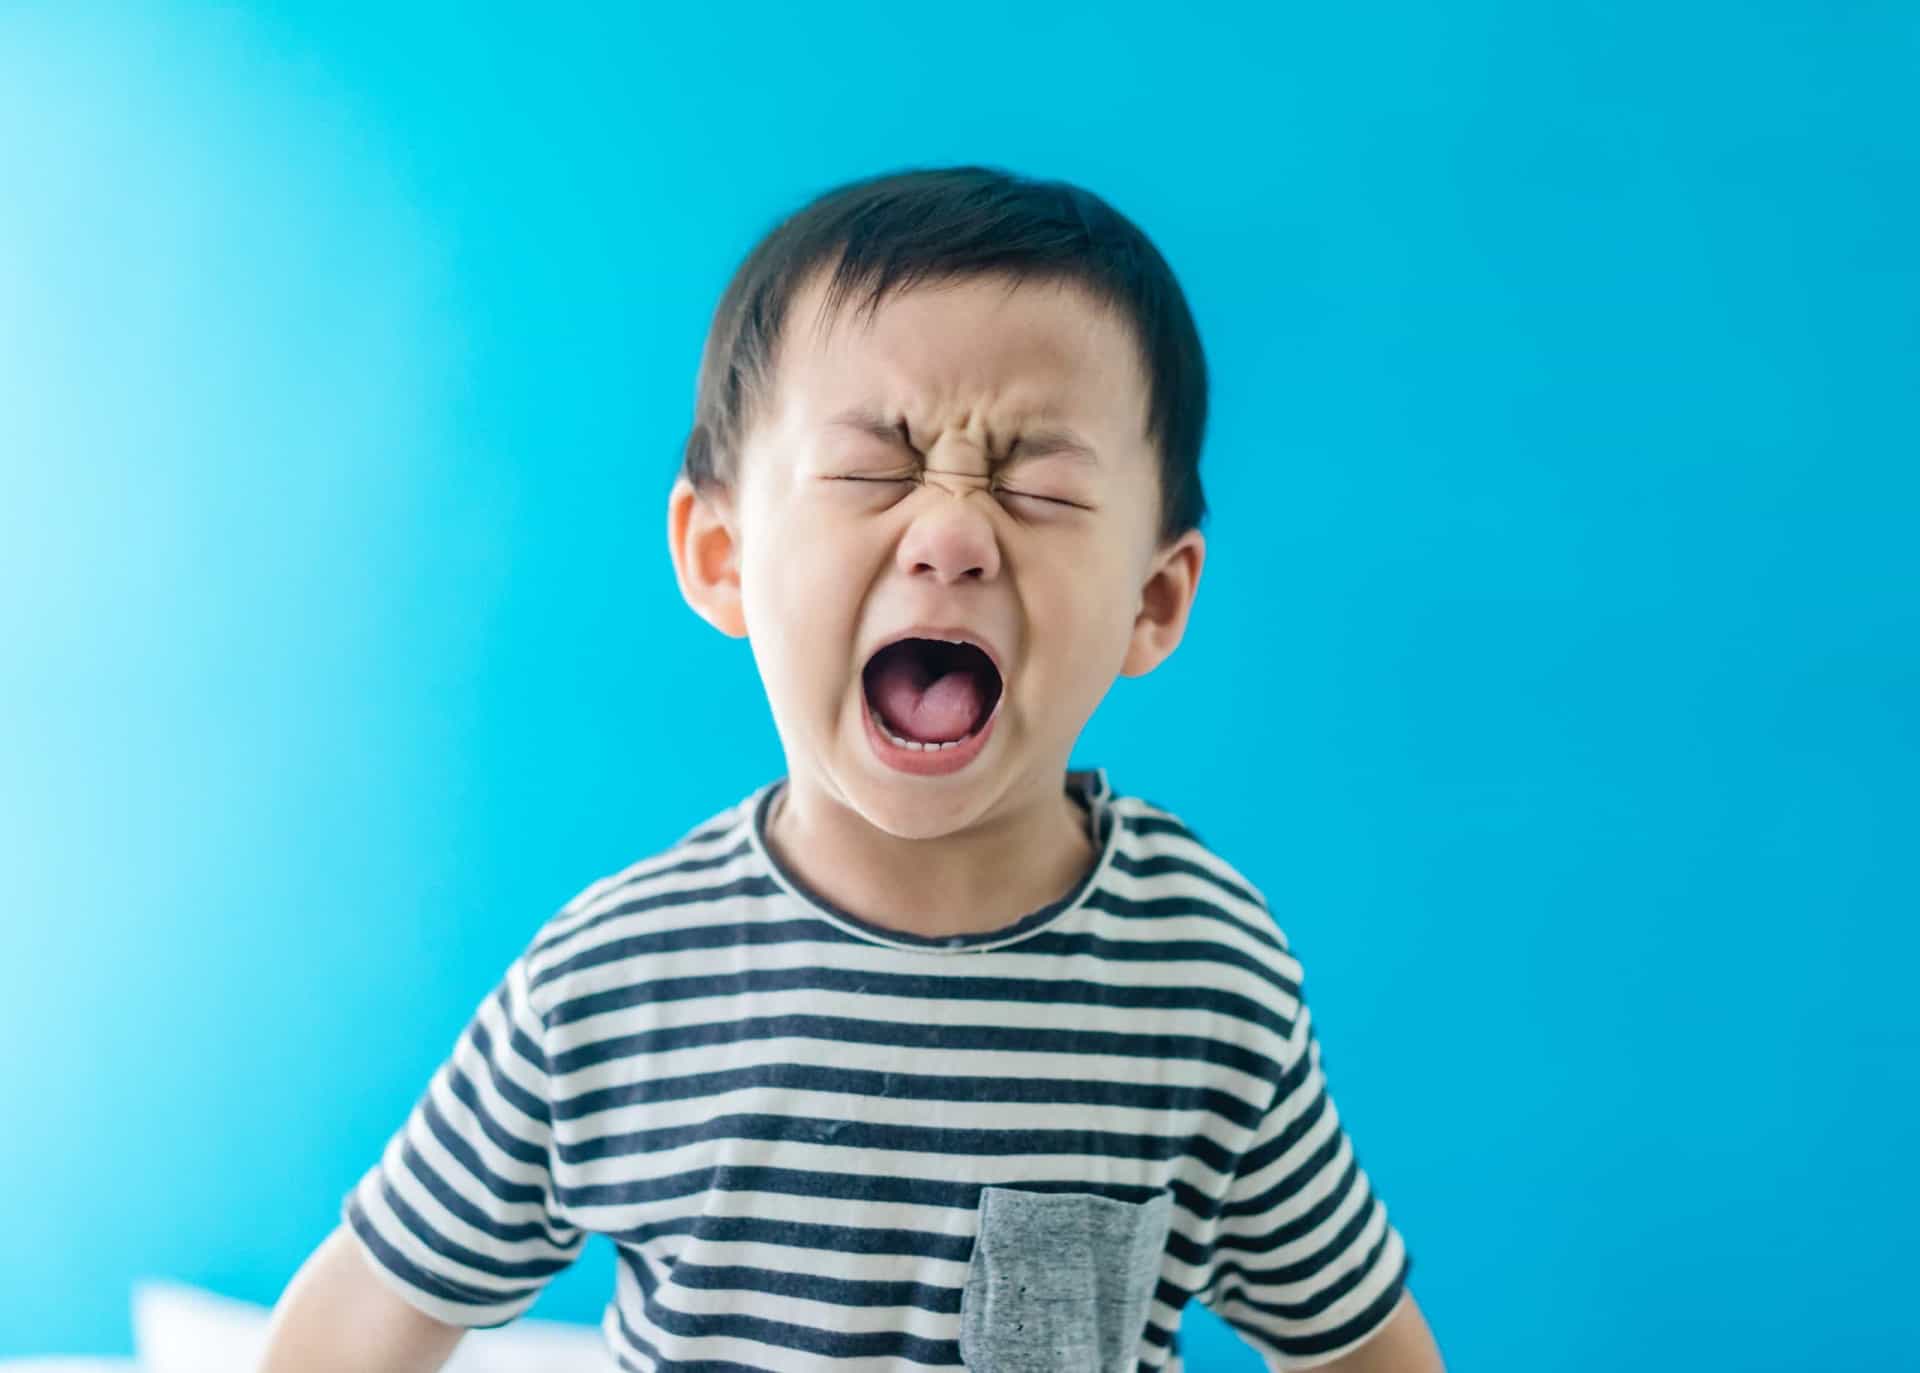 <p><span>A child with selective mutism may avoid eye contact and appear otherwise socially awkward. They may be stubborn or aggressive and more prone to temper tantrums. </span></p><p>You may also like:<a href="https://www.starsinsider.com/n/254530?utm_source=msn.com&utm_medium=display&utm_campaign=referral_description&utm_content=521574en-us"> Surprisingly cheap honeymoon destinations</a></p>